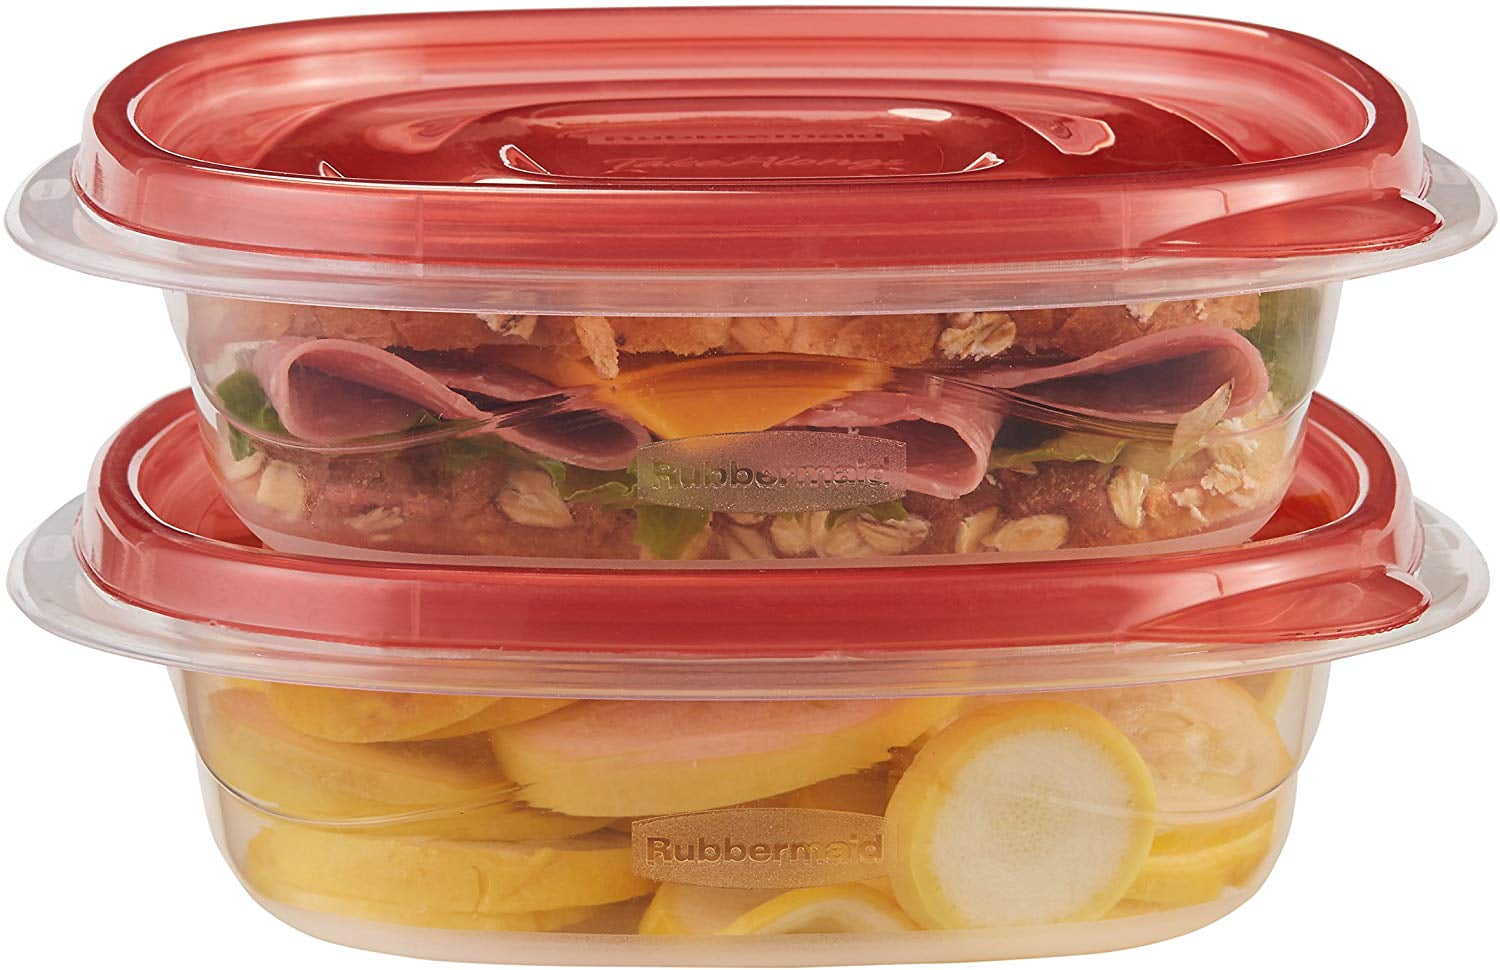 Rubbermaid TakeAlongs Food Storage Containers, Set of 8 (16 Pieces